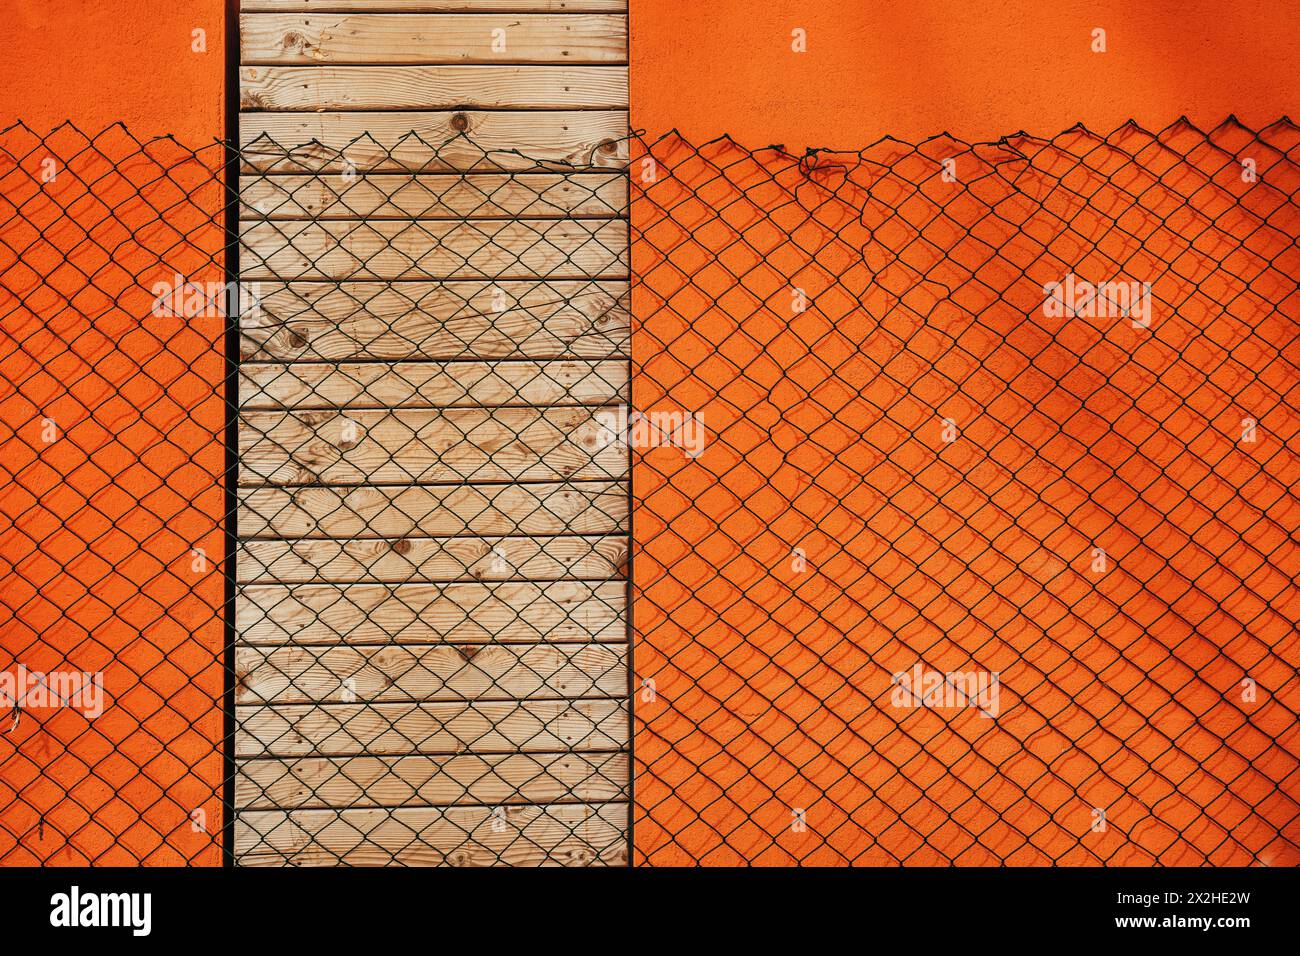 Chain link fence casting shadow over orange wall and doors shut with wooden planks, design element Stock Photo